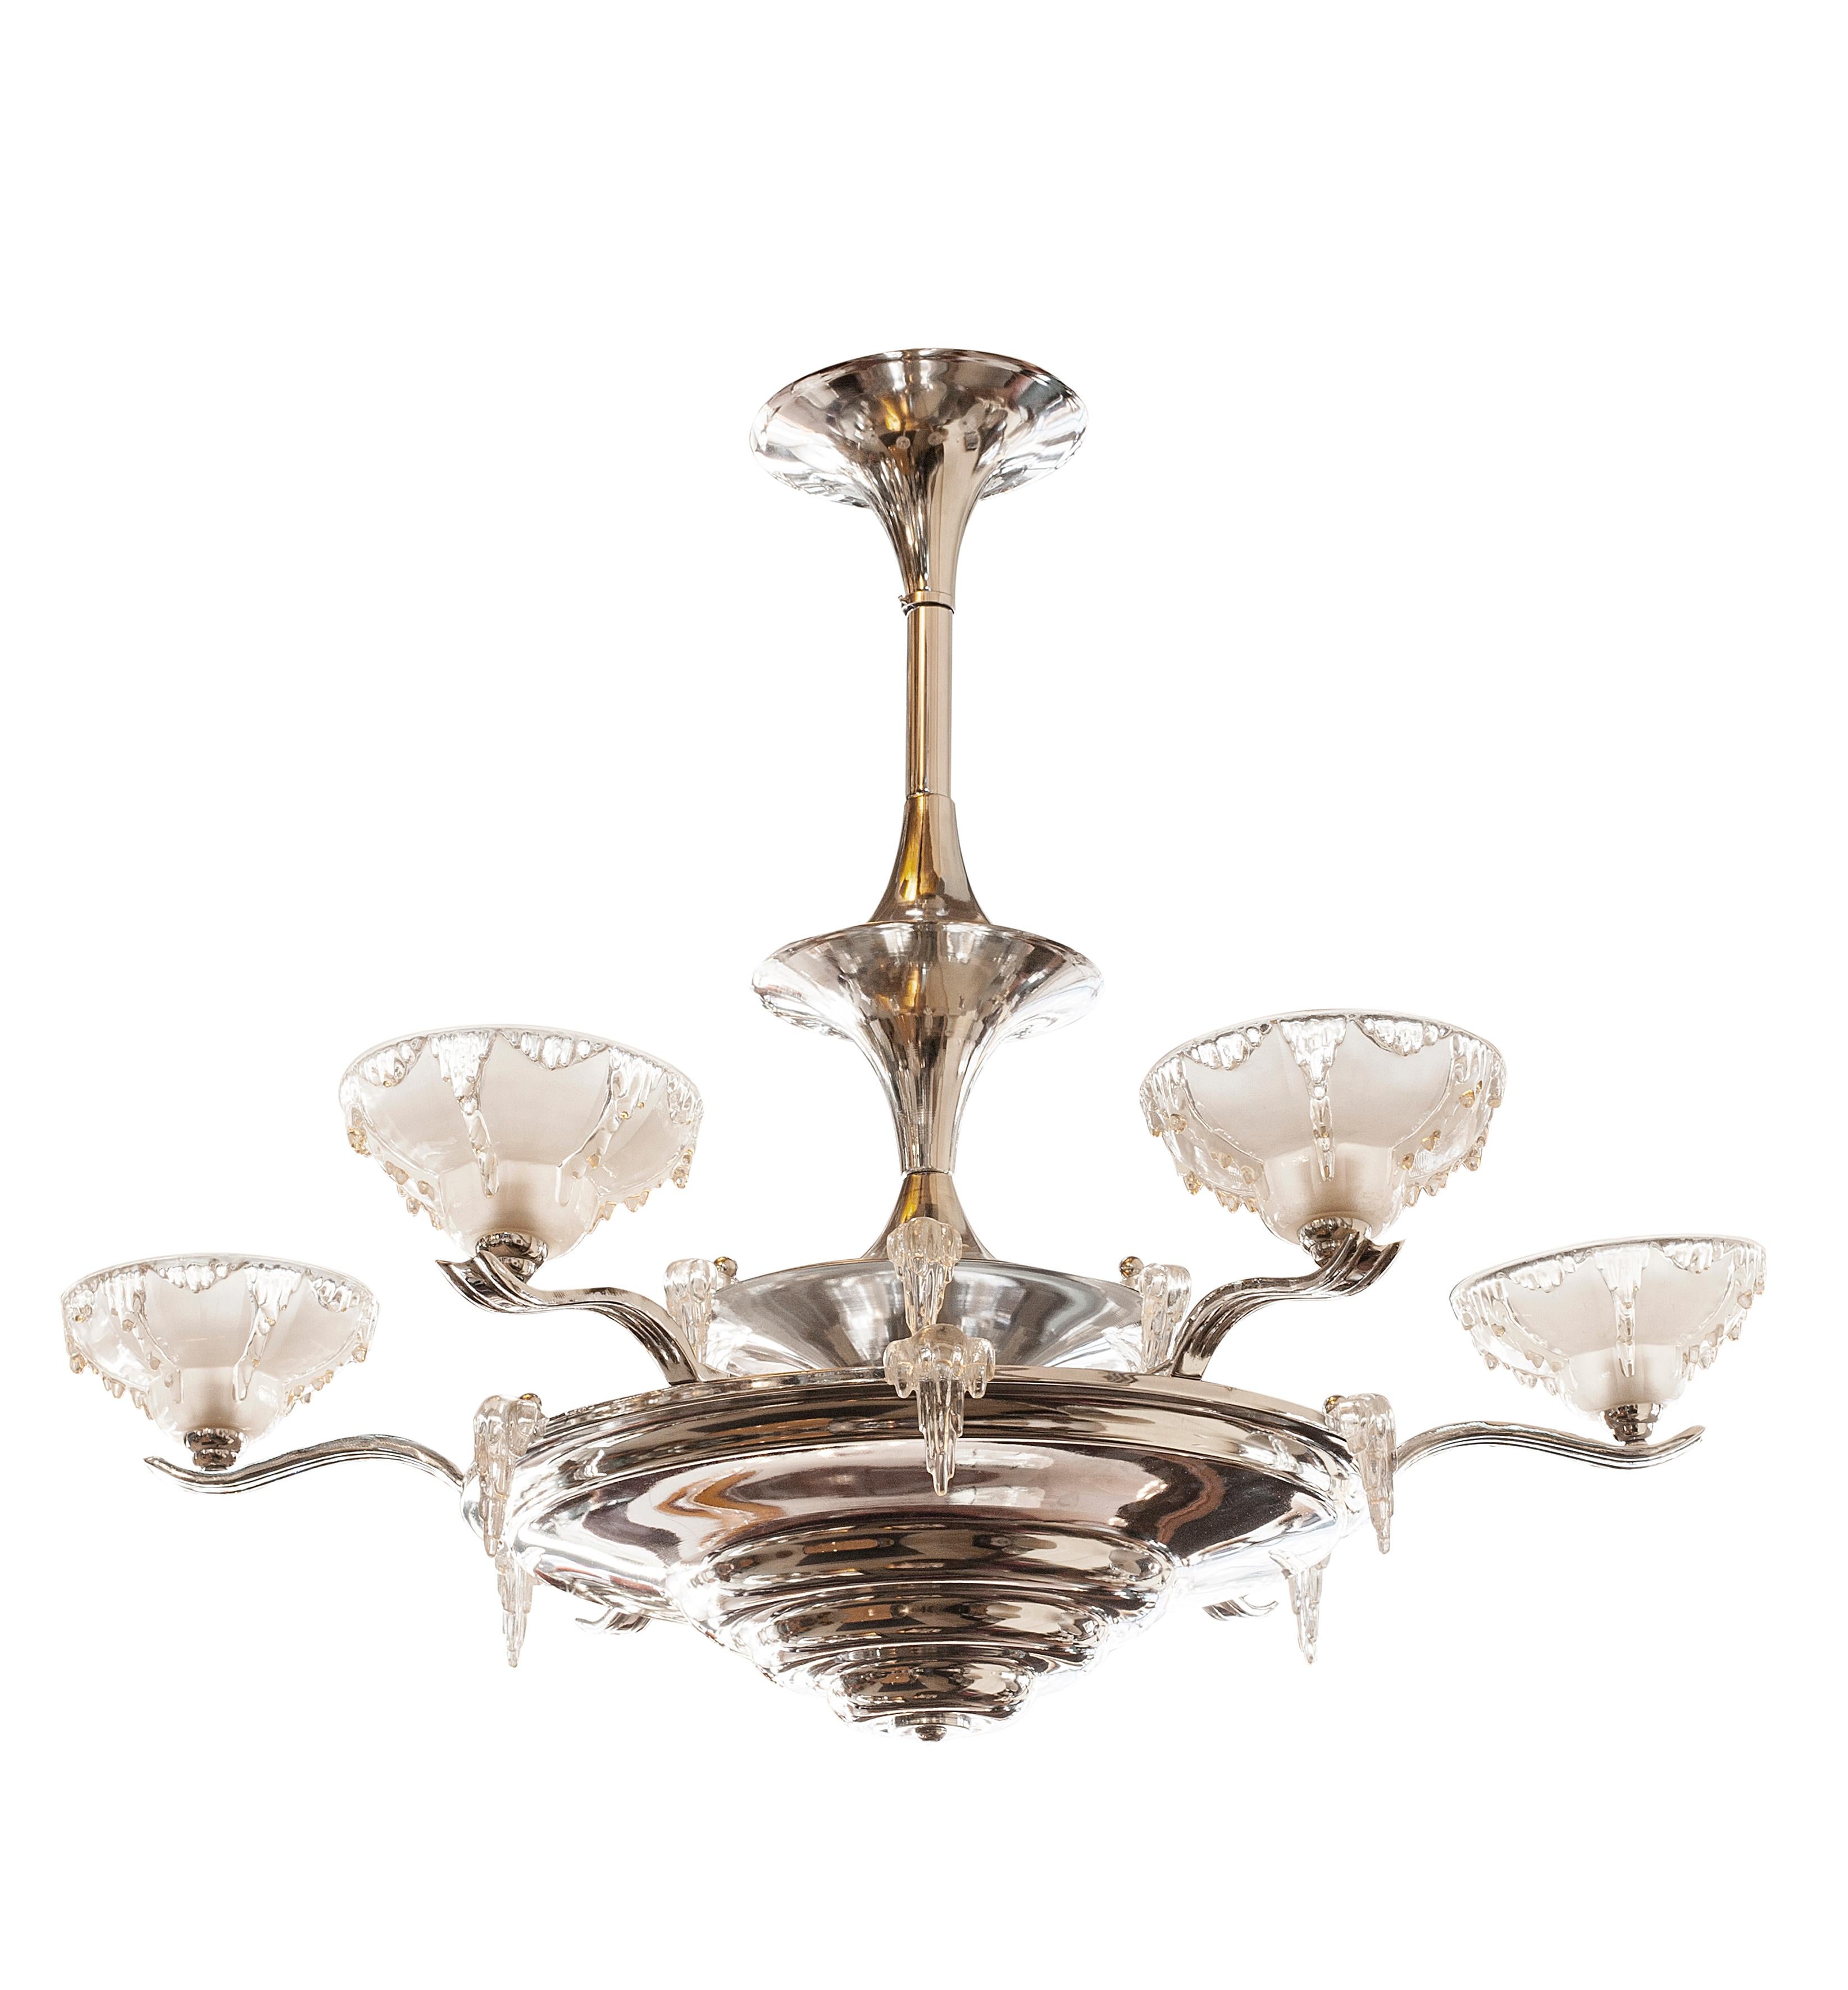 Hanging lamp

Material: Chromed and Art Glass
Style: Art Deco
Country: France
To take care of your property and the lives of our customers, the new wiring has been done.
If you are looking for sconces to match your ceiling lighting, we have what you